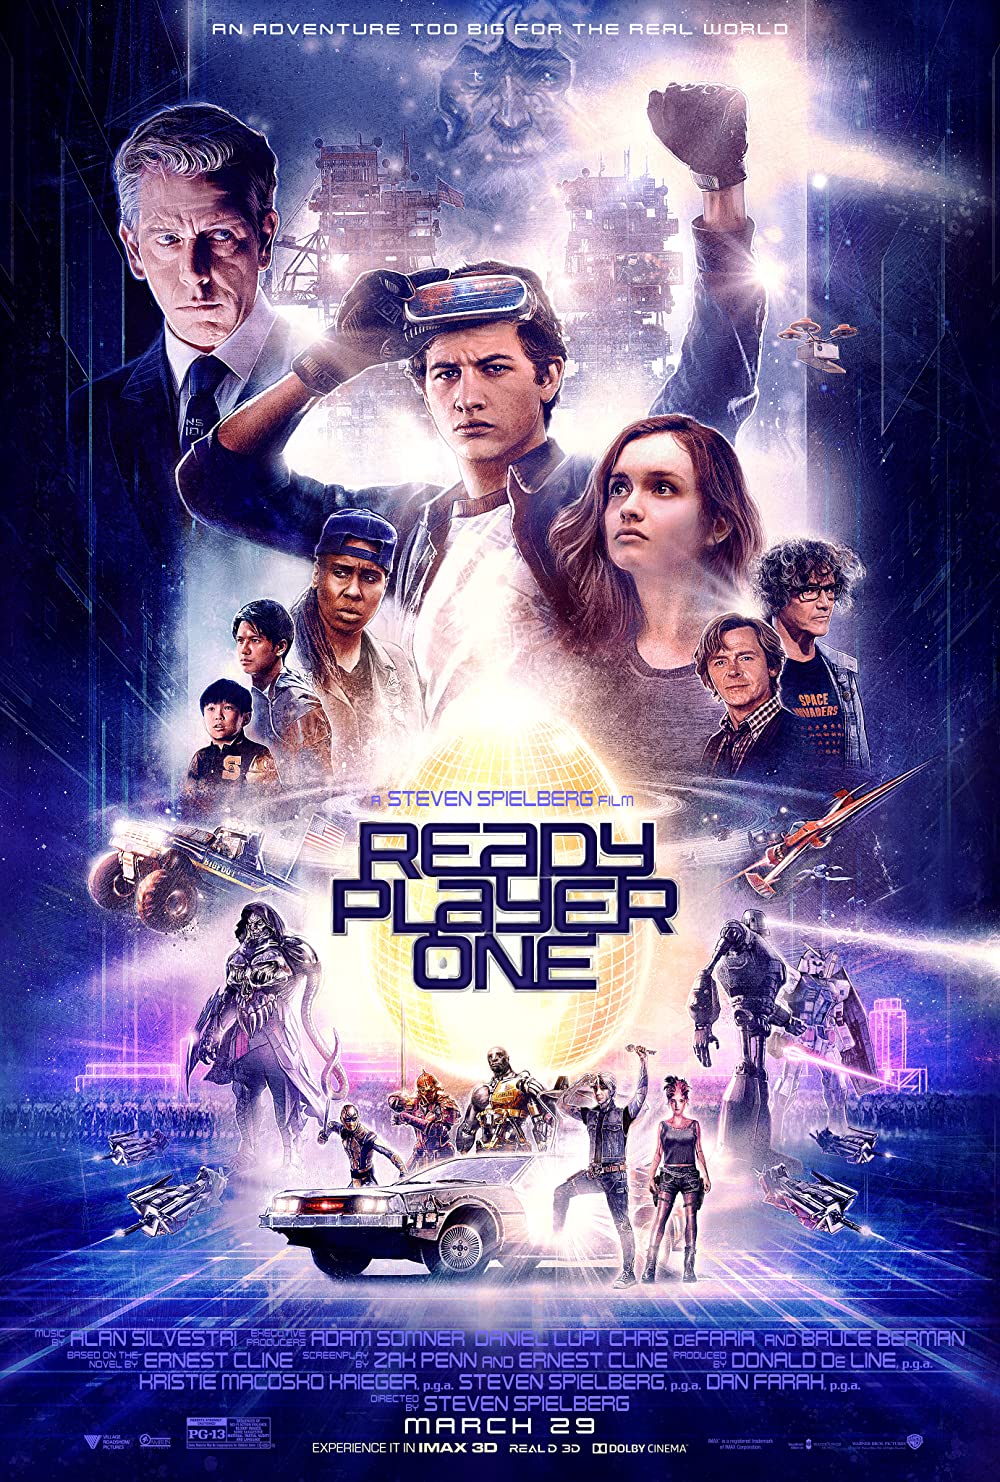 Lena As Aech In Ready Player One Wallpapers